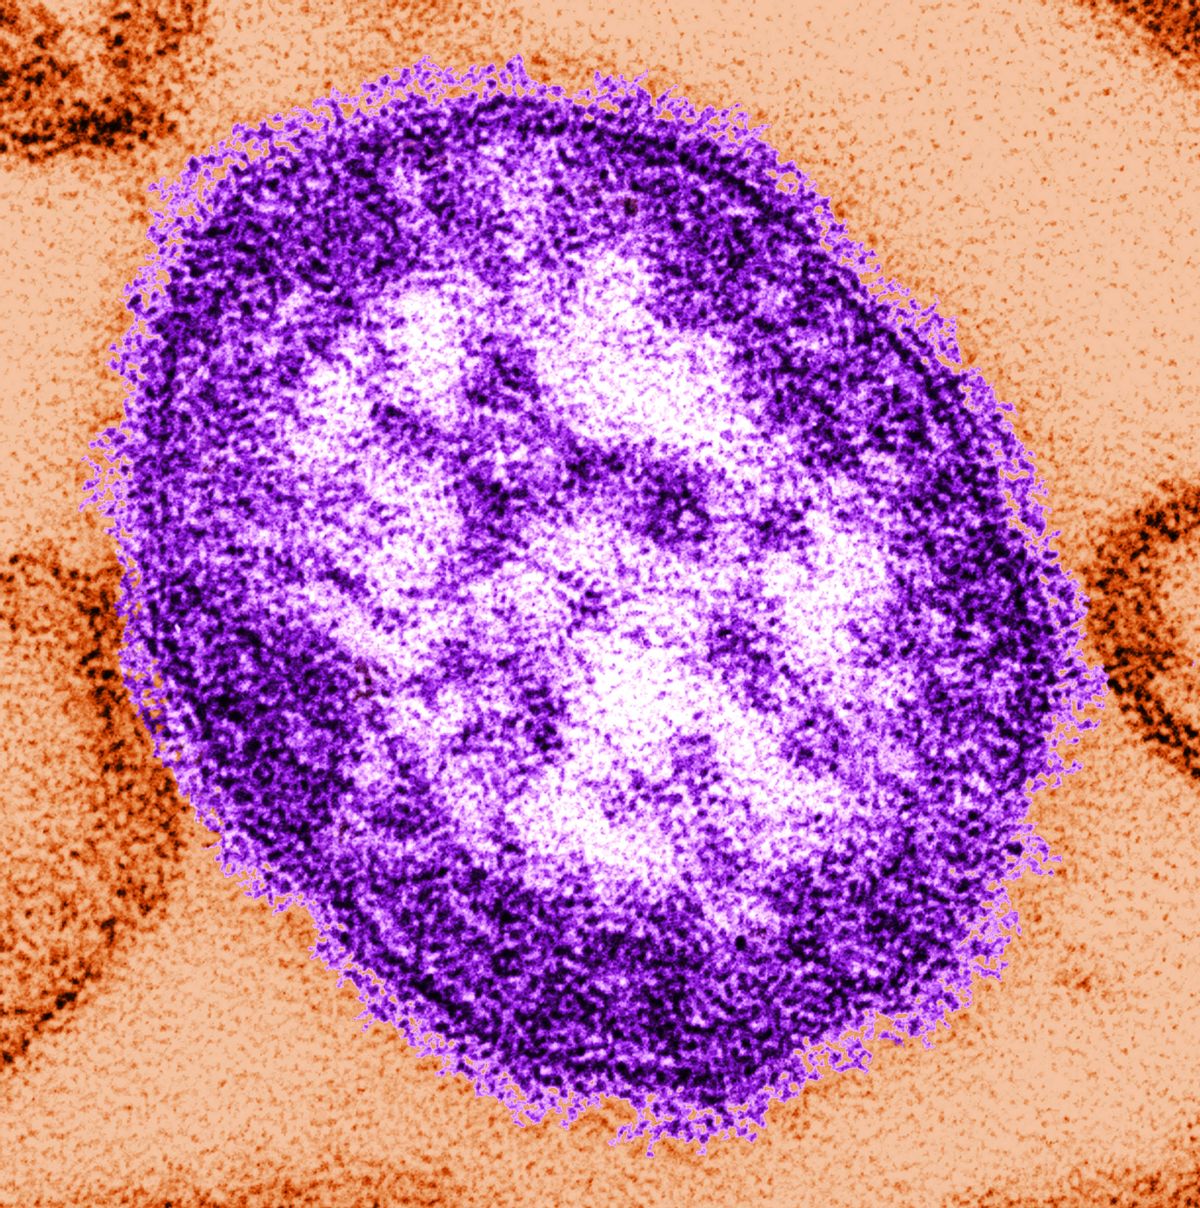 This undated image made available by the Centers for Disease Control and Prevention on Feb. 4, 2015 shows an electron microscope image of a measles virus particle, center. Measles is considered one of the most infectious diseases known. The virus is spread through the air when someone infected coughs or sneezes. (AP Photo/Centers for Disease Control and Prevention, Cynthia Goldsmith) (AP)